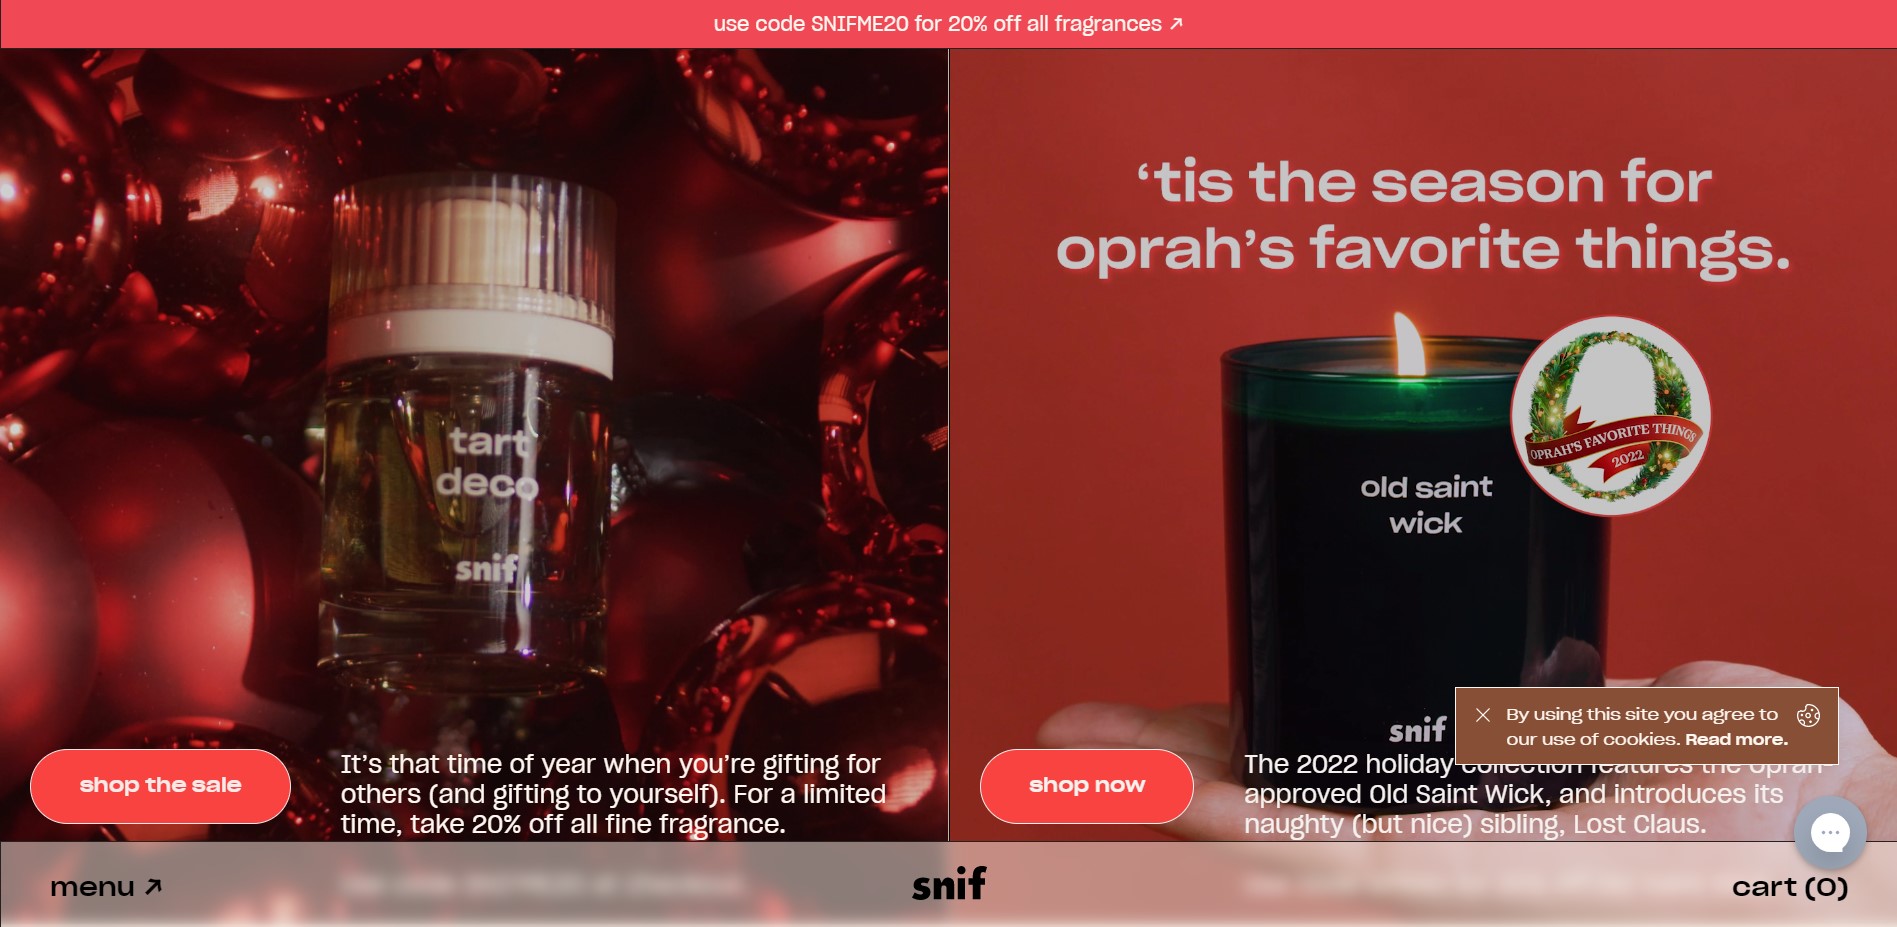 Shopify beauty stores: Snif